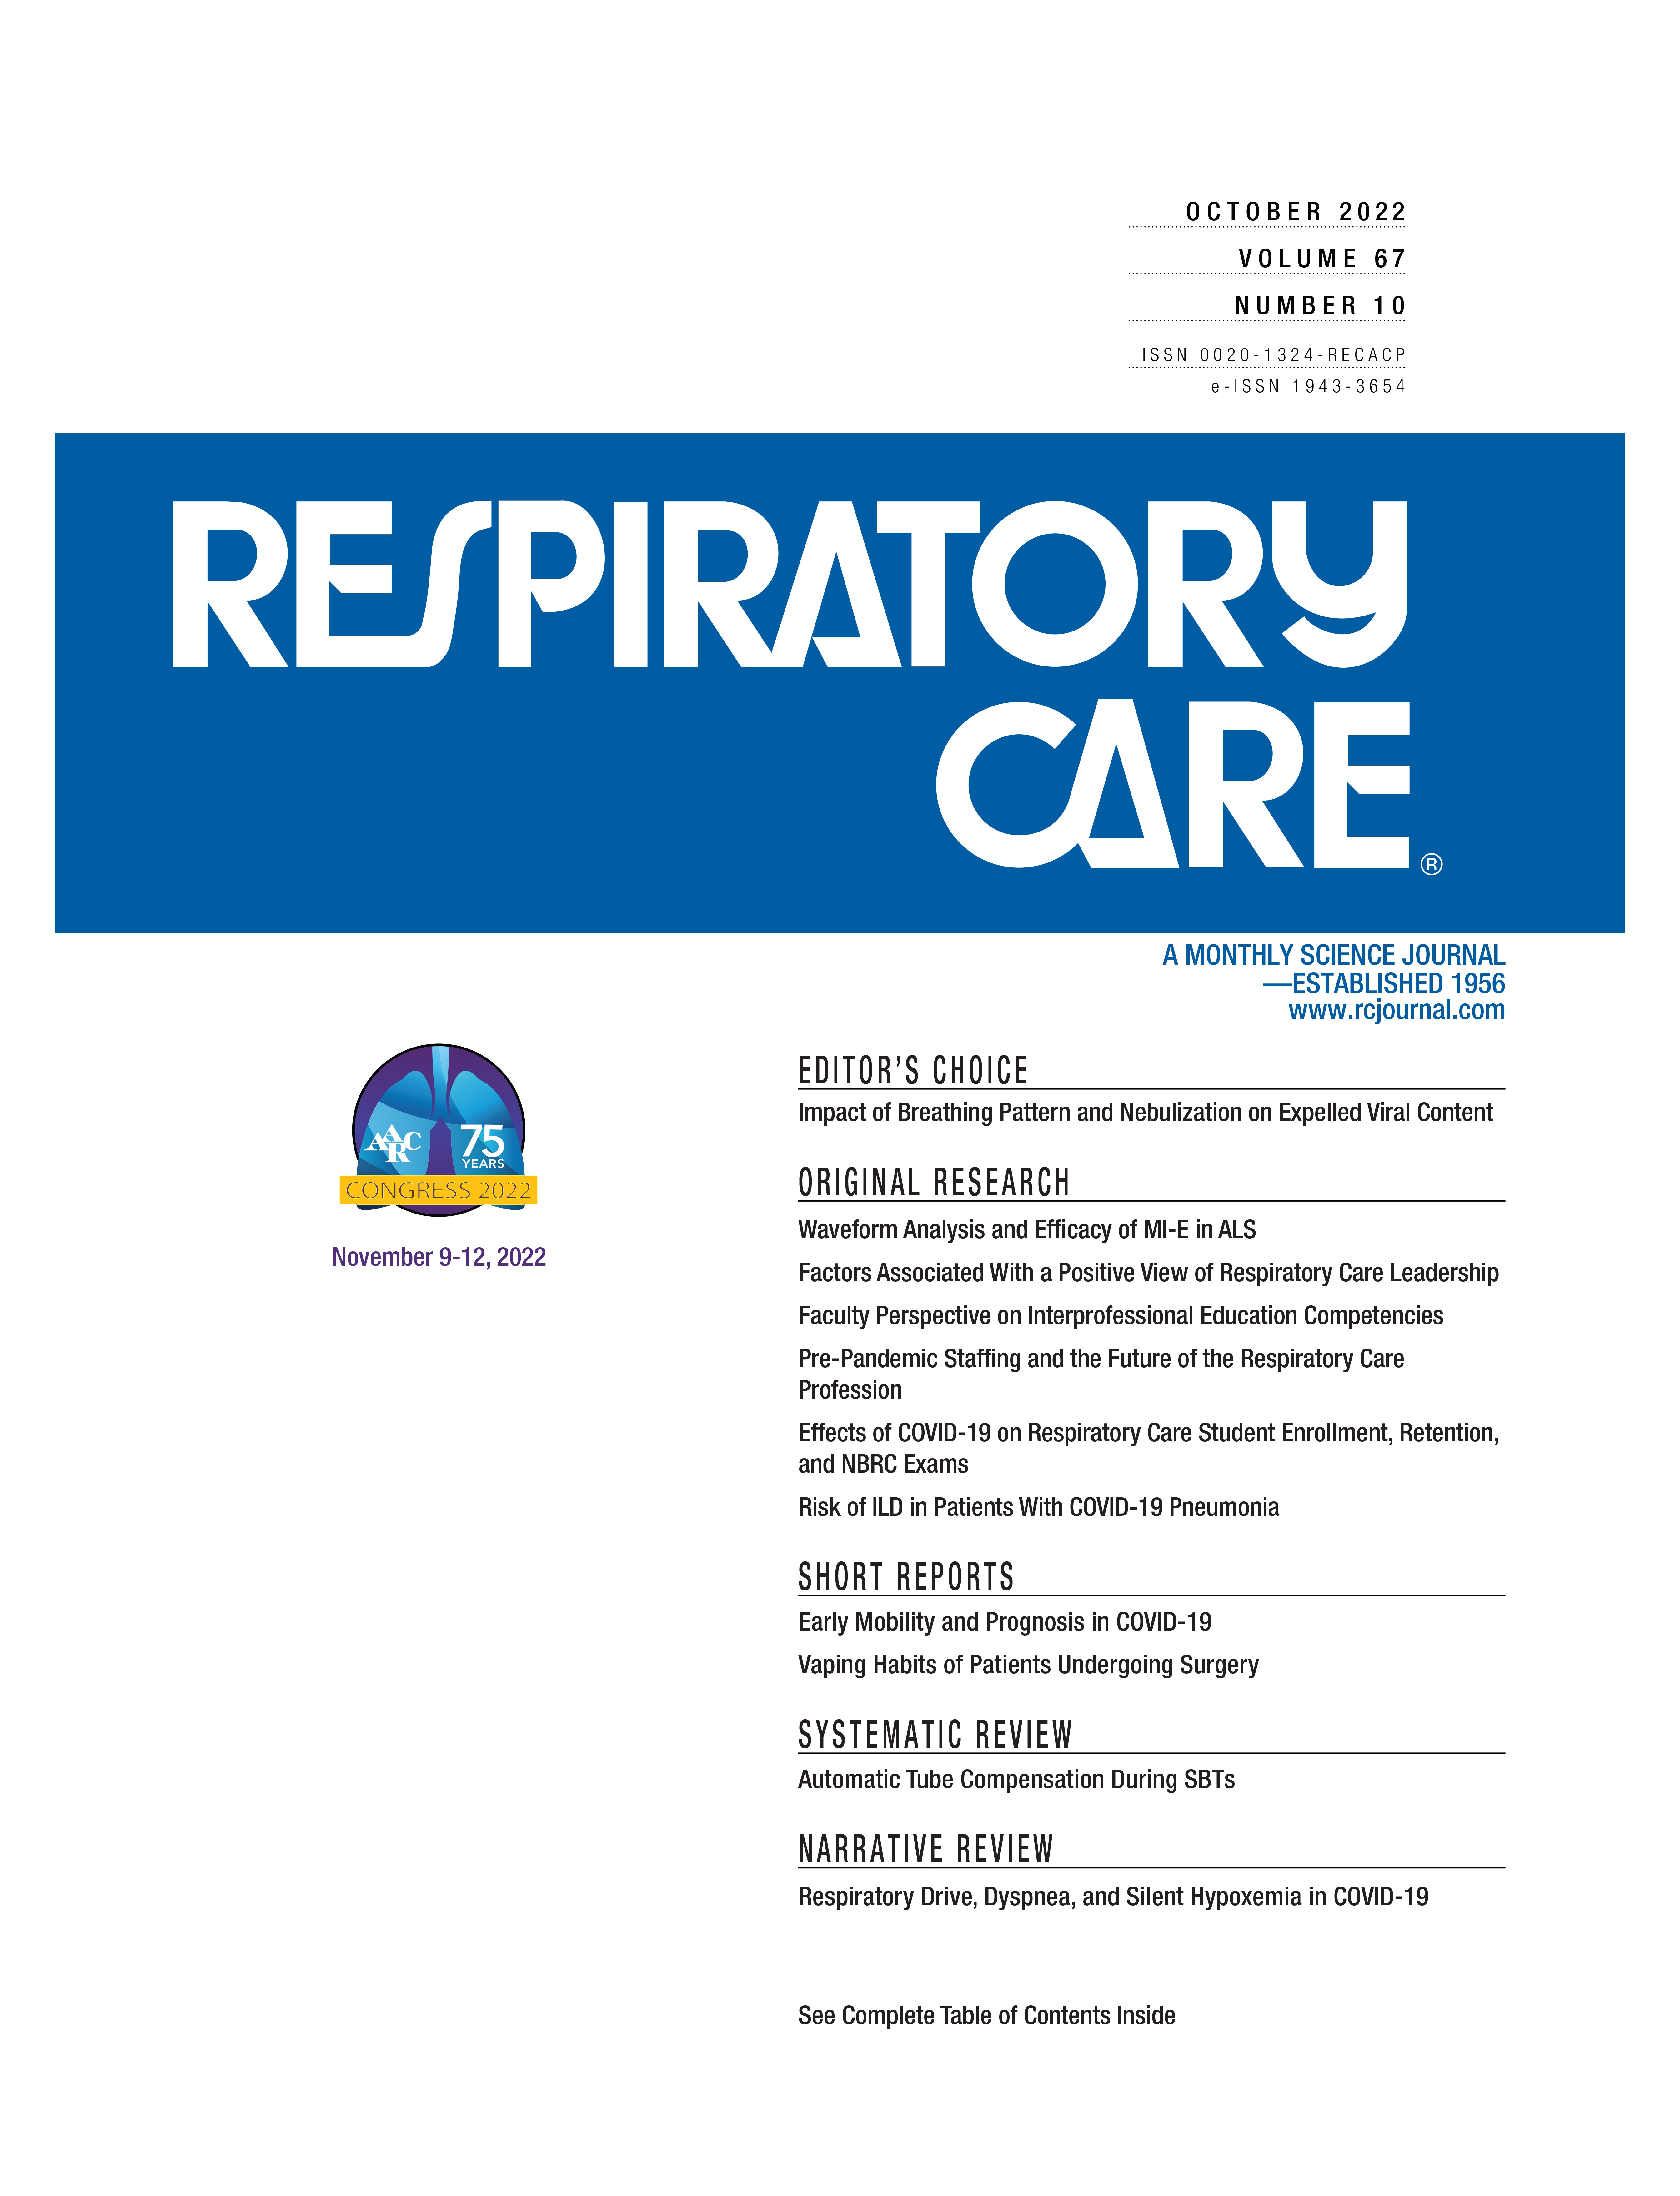 Go With the Flow: Are We Cracking the Code? Respiratory Management of Bulbar ALS Is Evolving